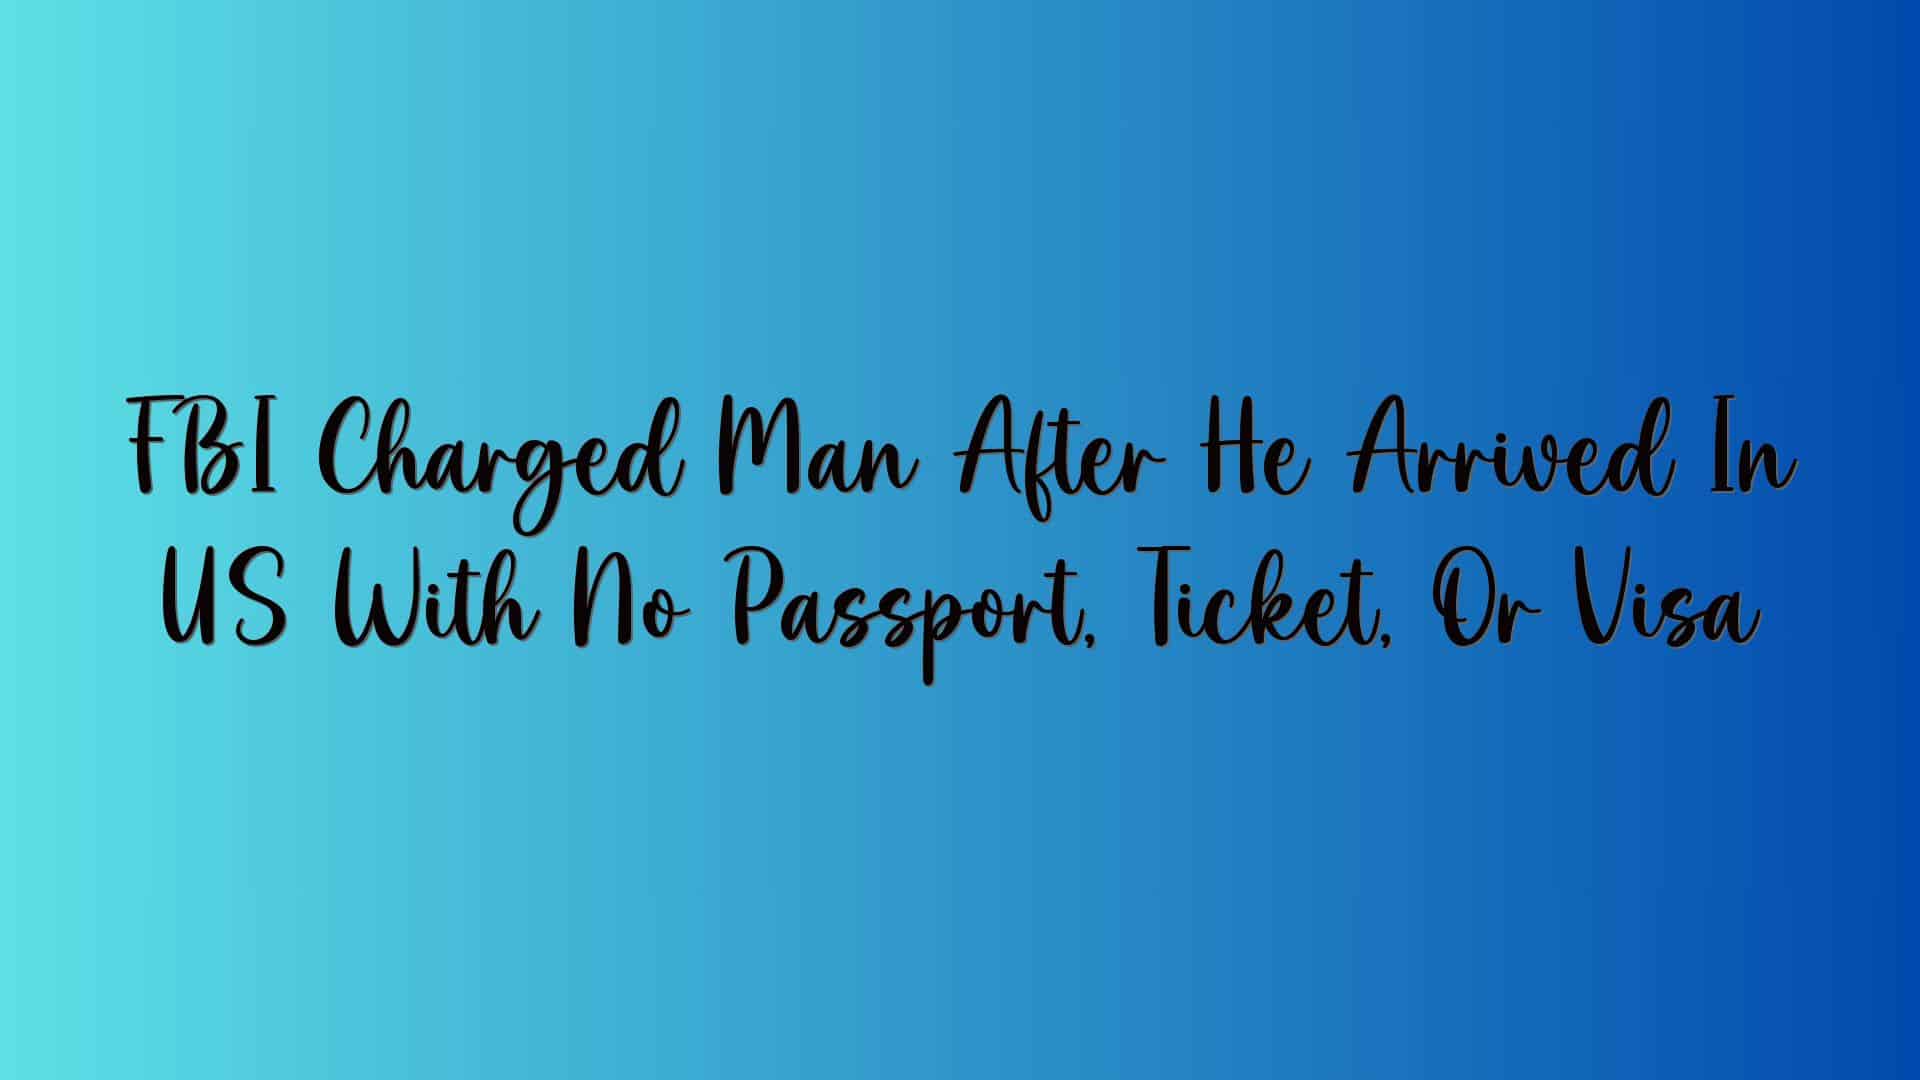 FBI Charged Man After He Arrived In US With No Passport, Ticket, Or Visa